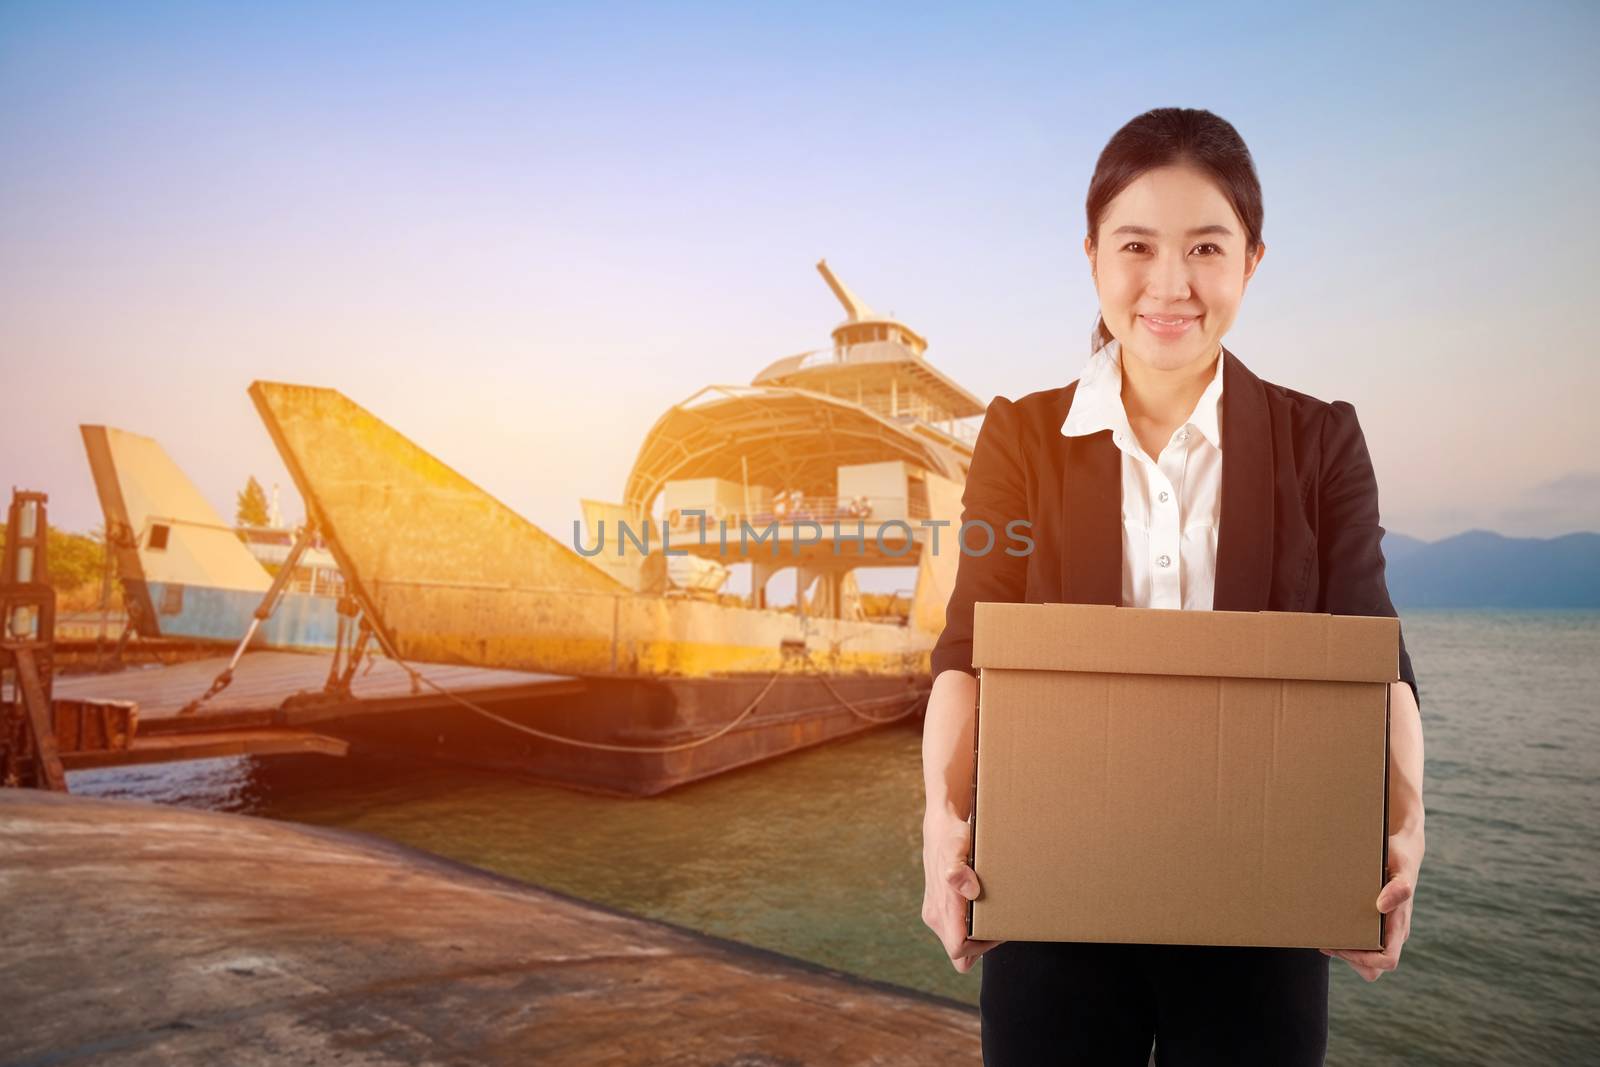 A young woman carrying a box wtih smiling on Cargo Ship background

